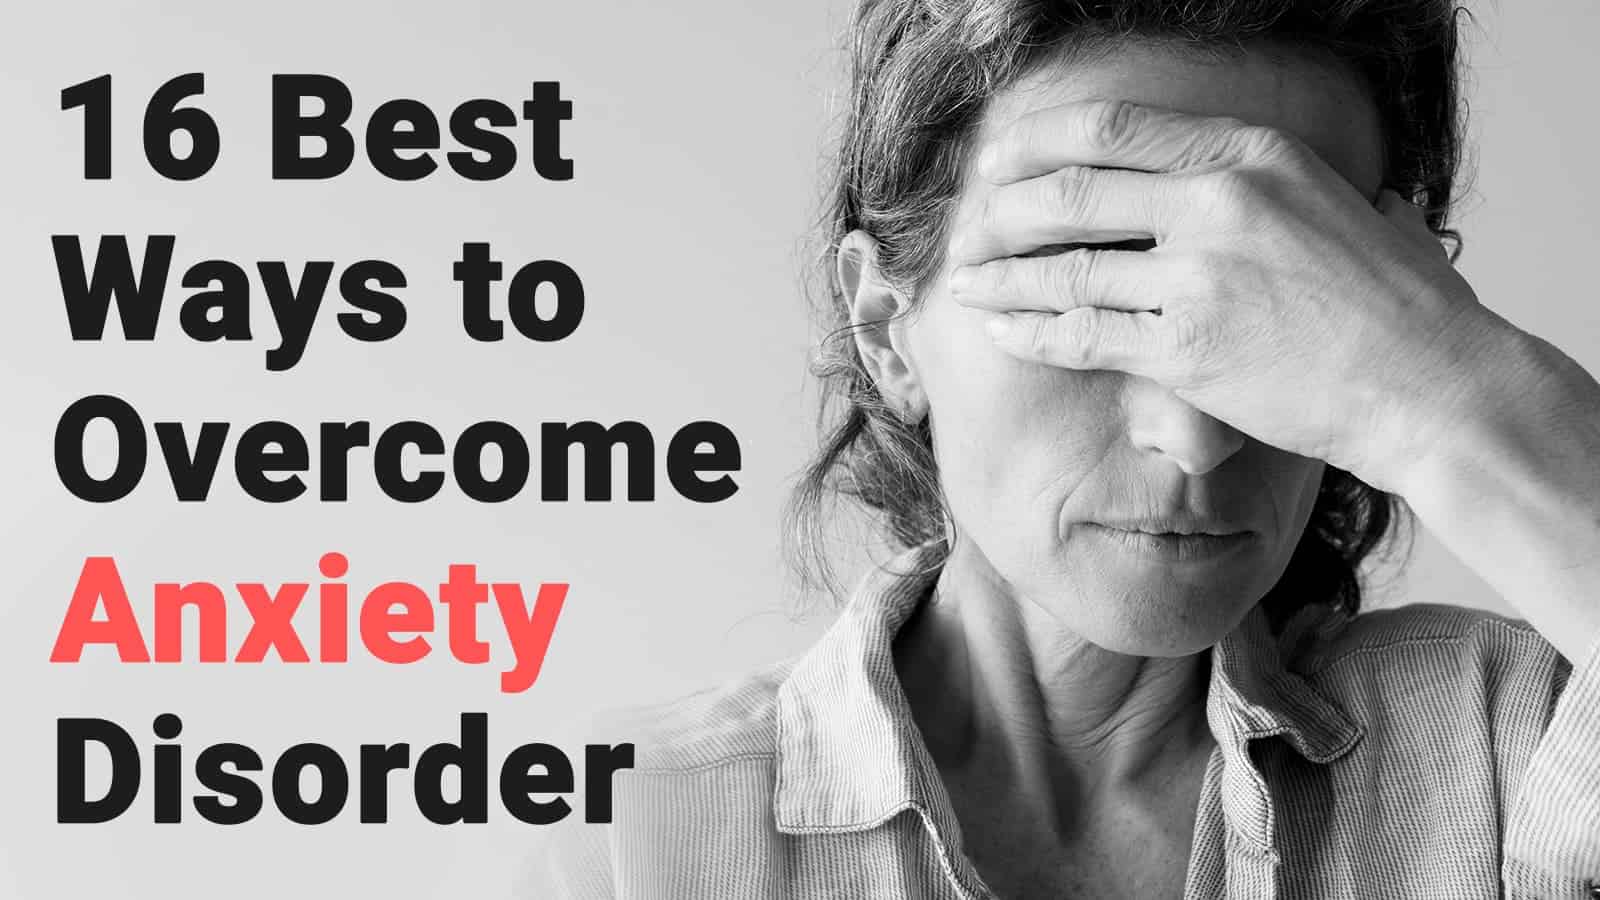 16 Best Ways to Overcome Anxiety Disorder